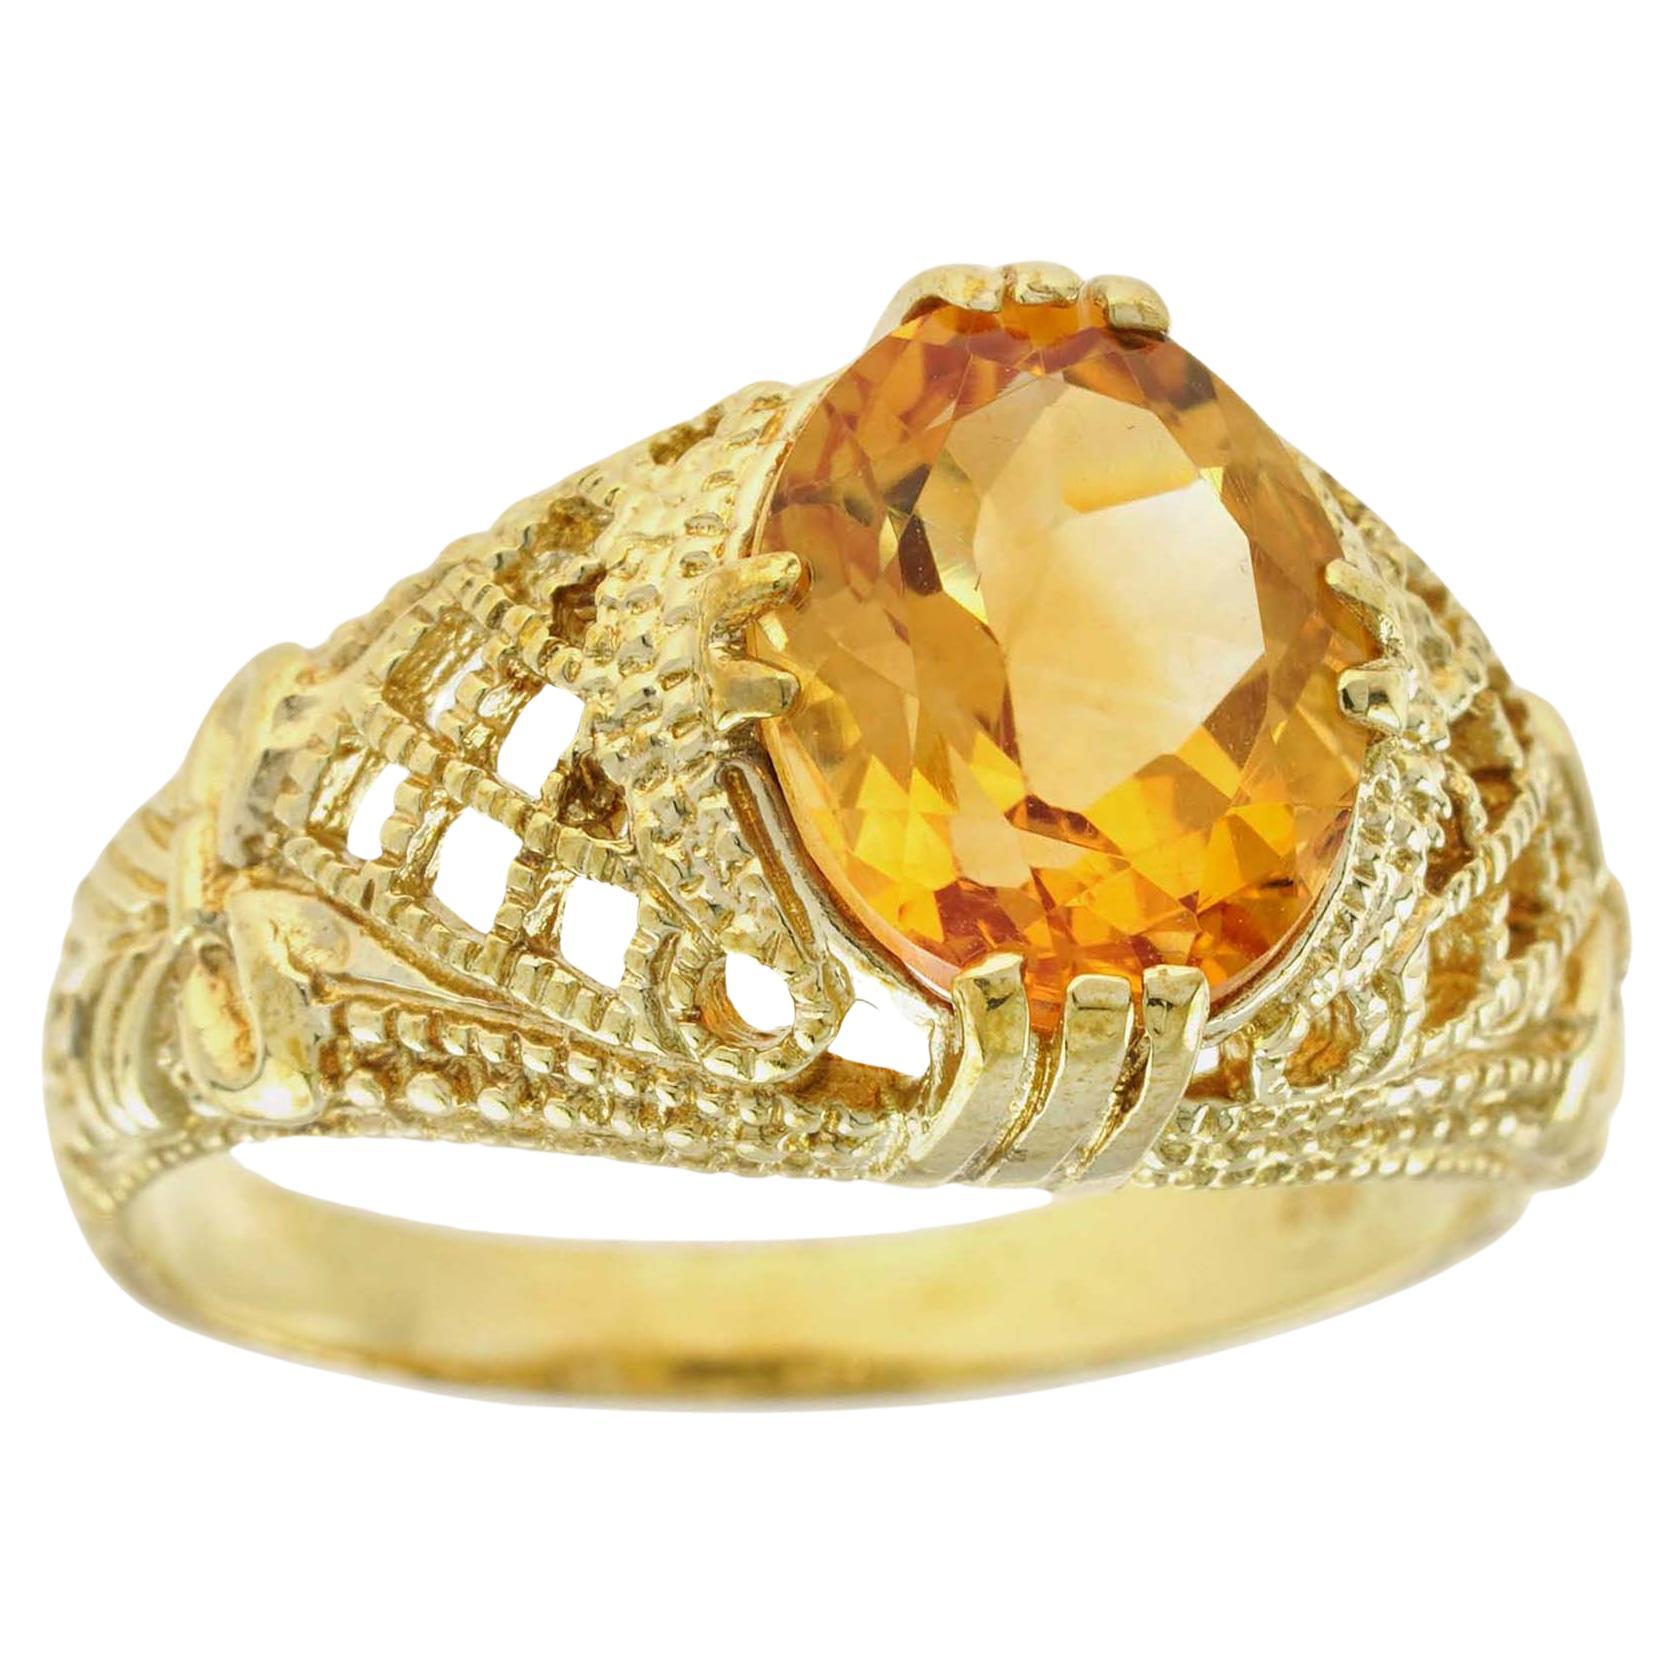 Natural Citrine Vintage Style Filigree Cocktail Ring in 9K Yellow Gold